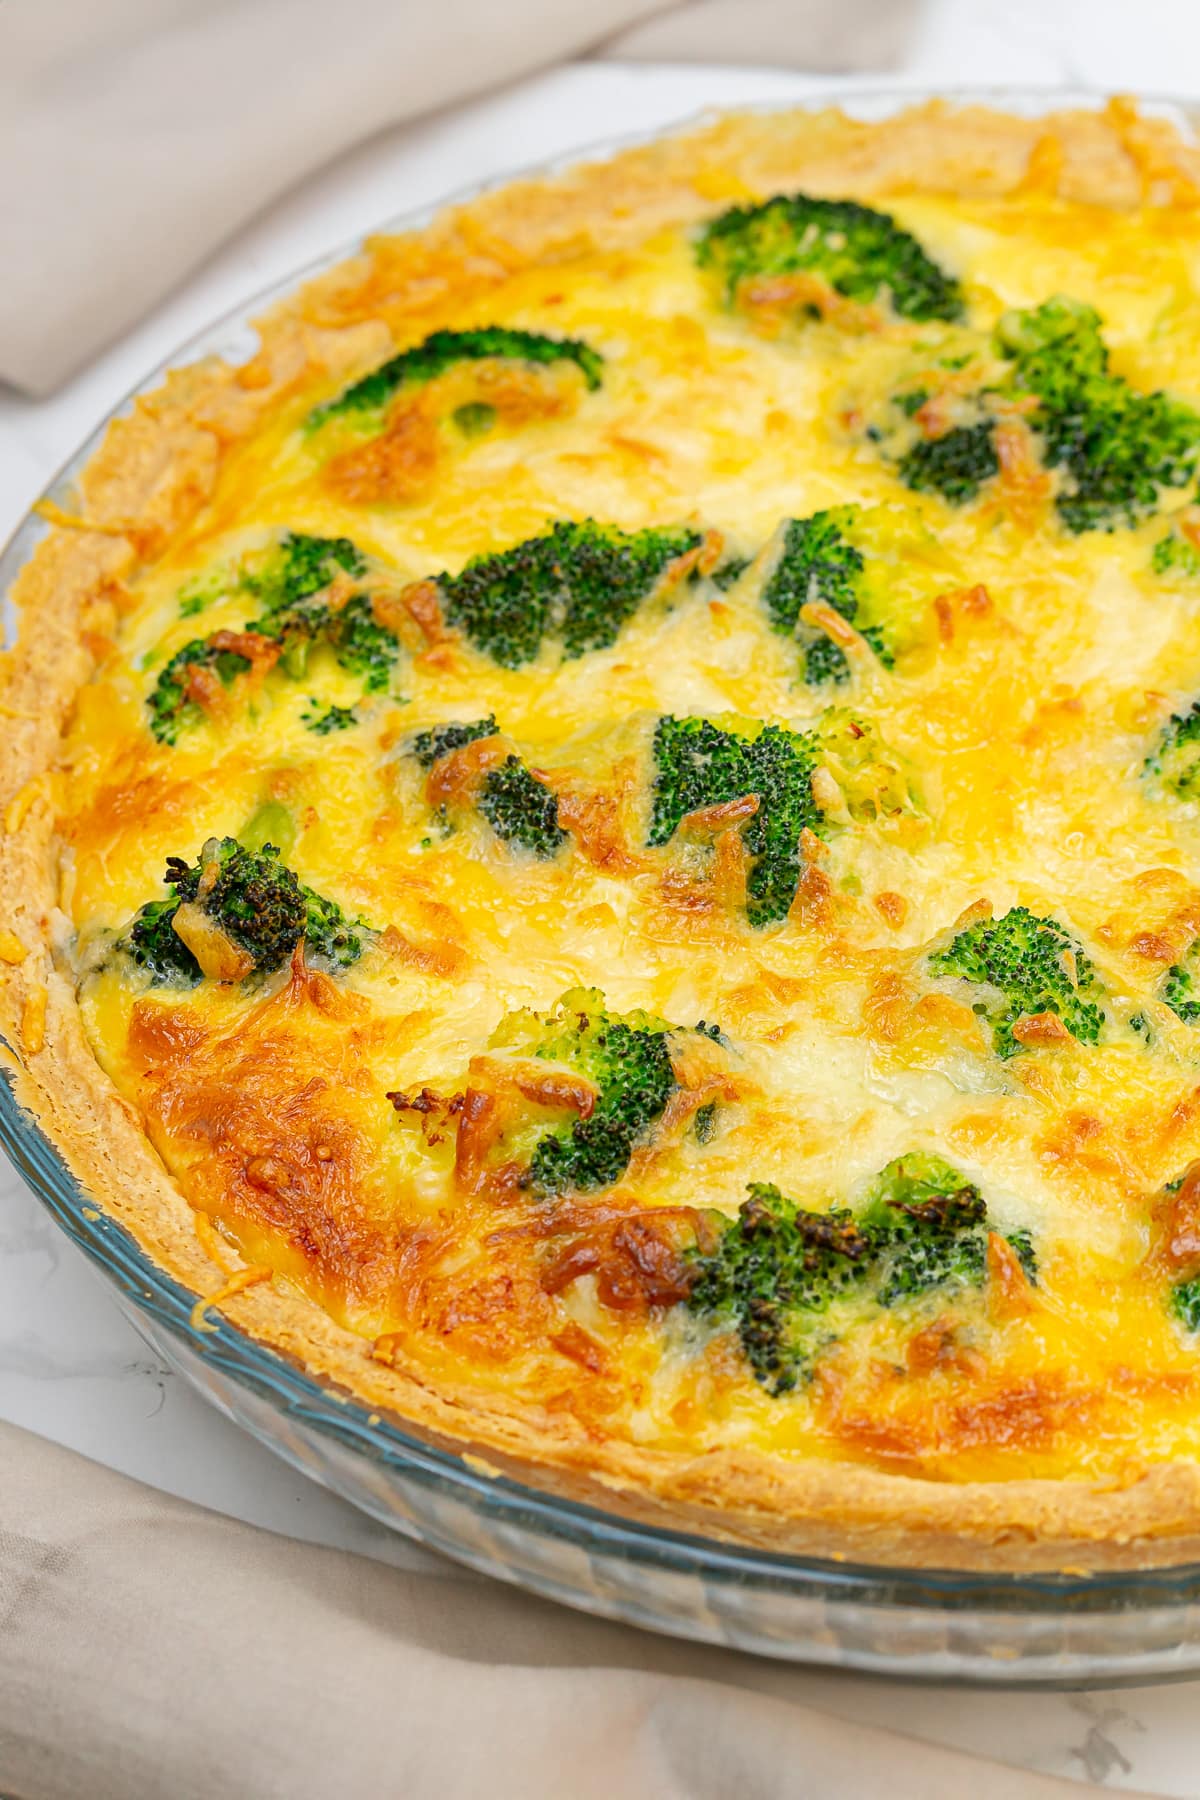 Freshly baked broccoli cheddar quiche in a glass pie dish, showing a golden-brown surface with broccoli florets and melted cheese.